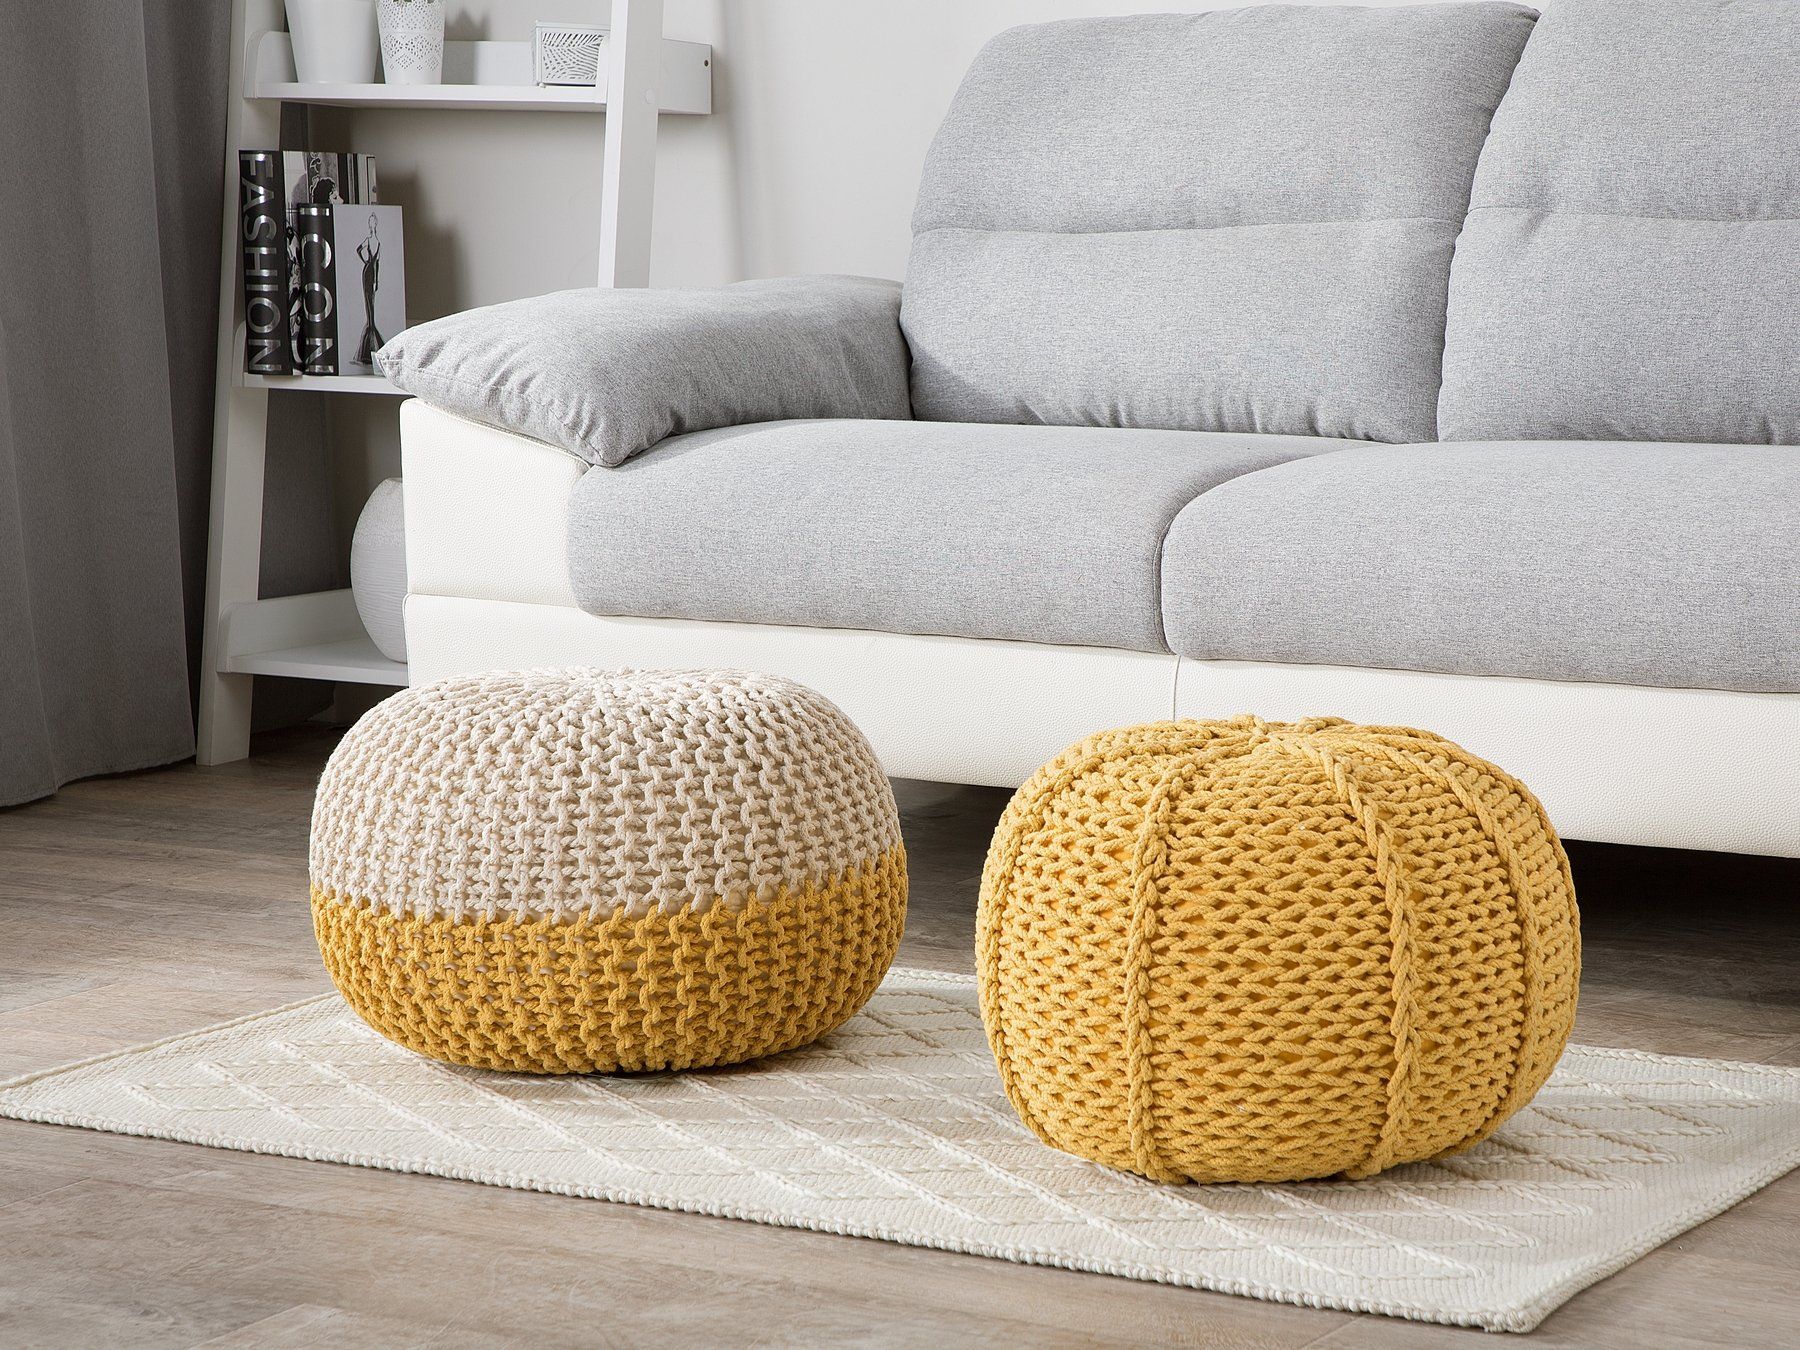 Pouffe Ottoman 50 X 35 Cm Beige And Yellow Conrad | Pouffe Ottoman Intended For Scandinavia Knit Tan Wool Cube Pouf Ottomans (View 19 of 20)